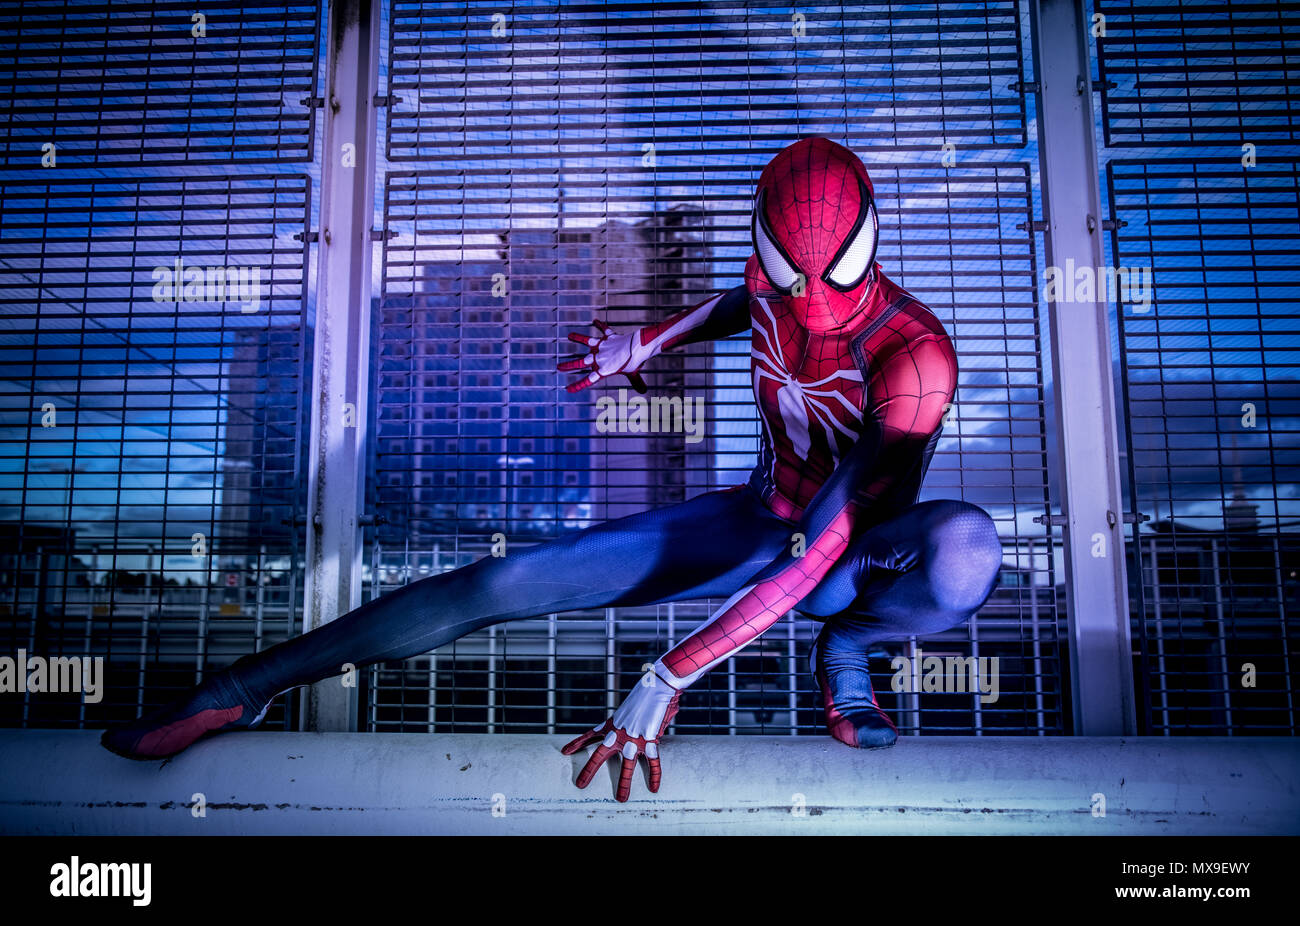 Spiderman cosplayer in his spiderman suit. Stock Photo